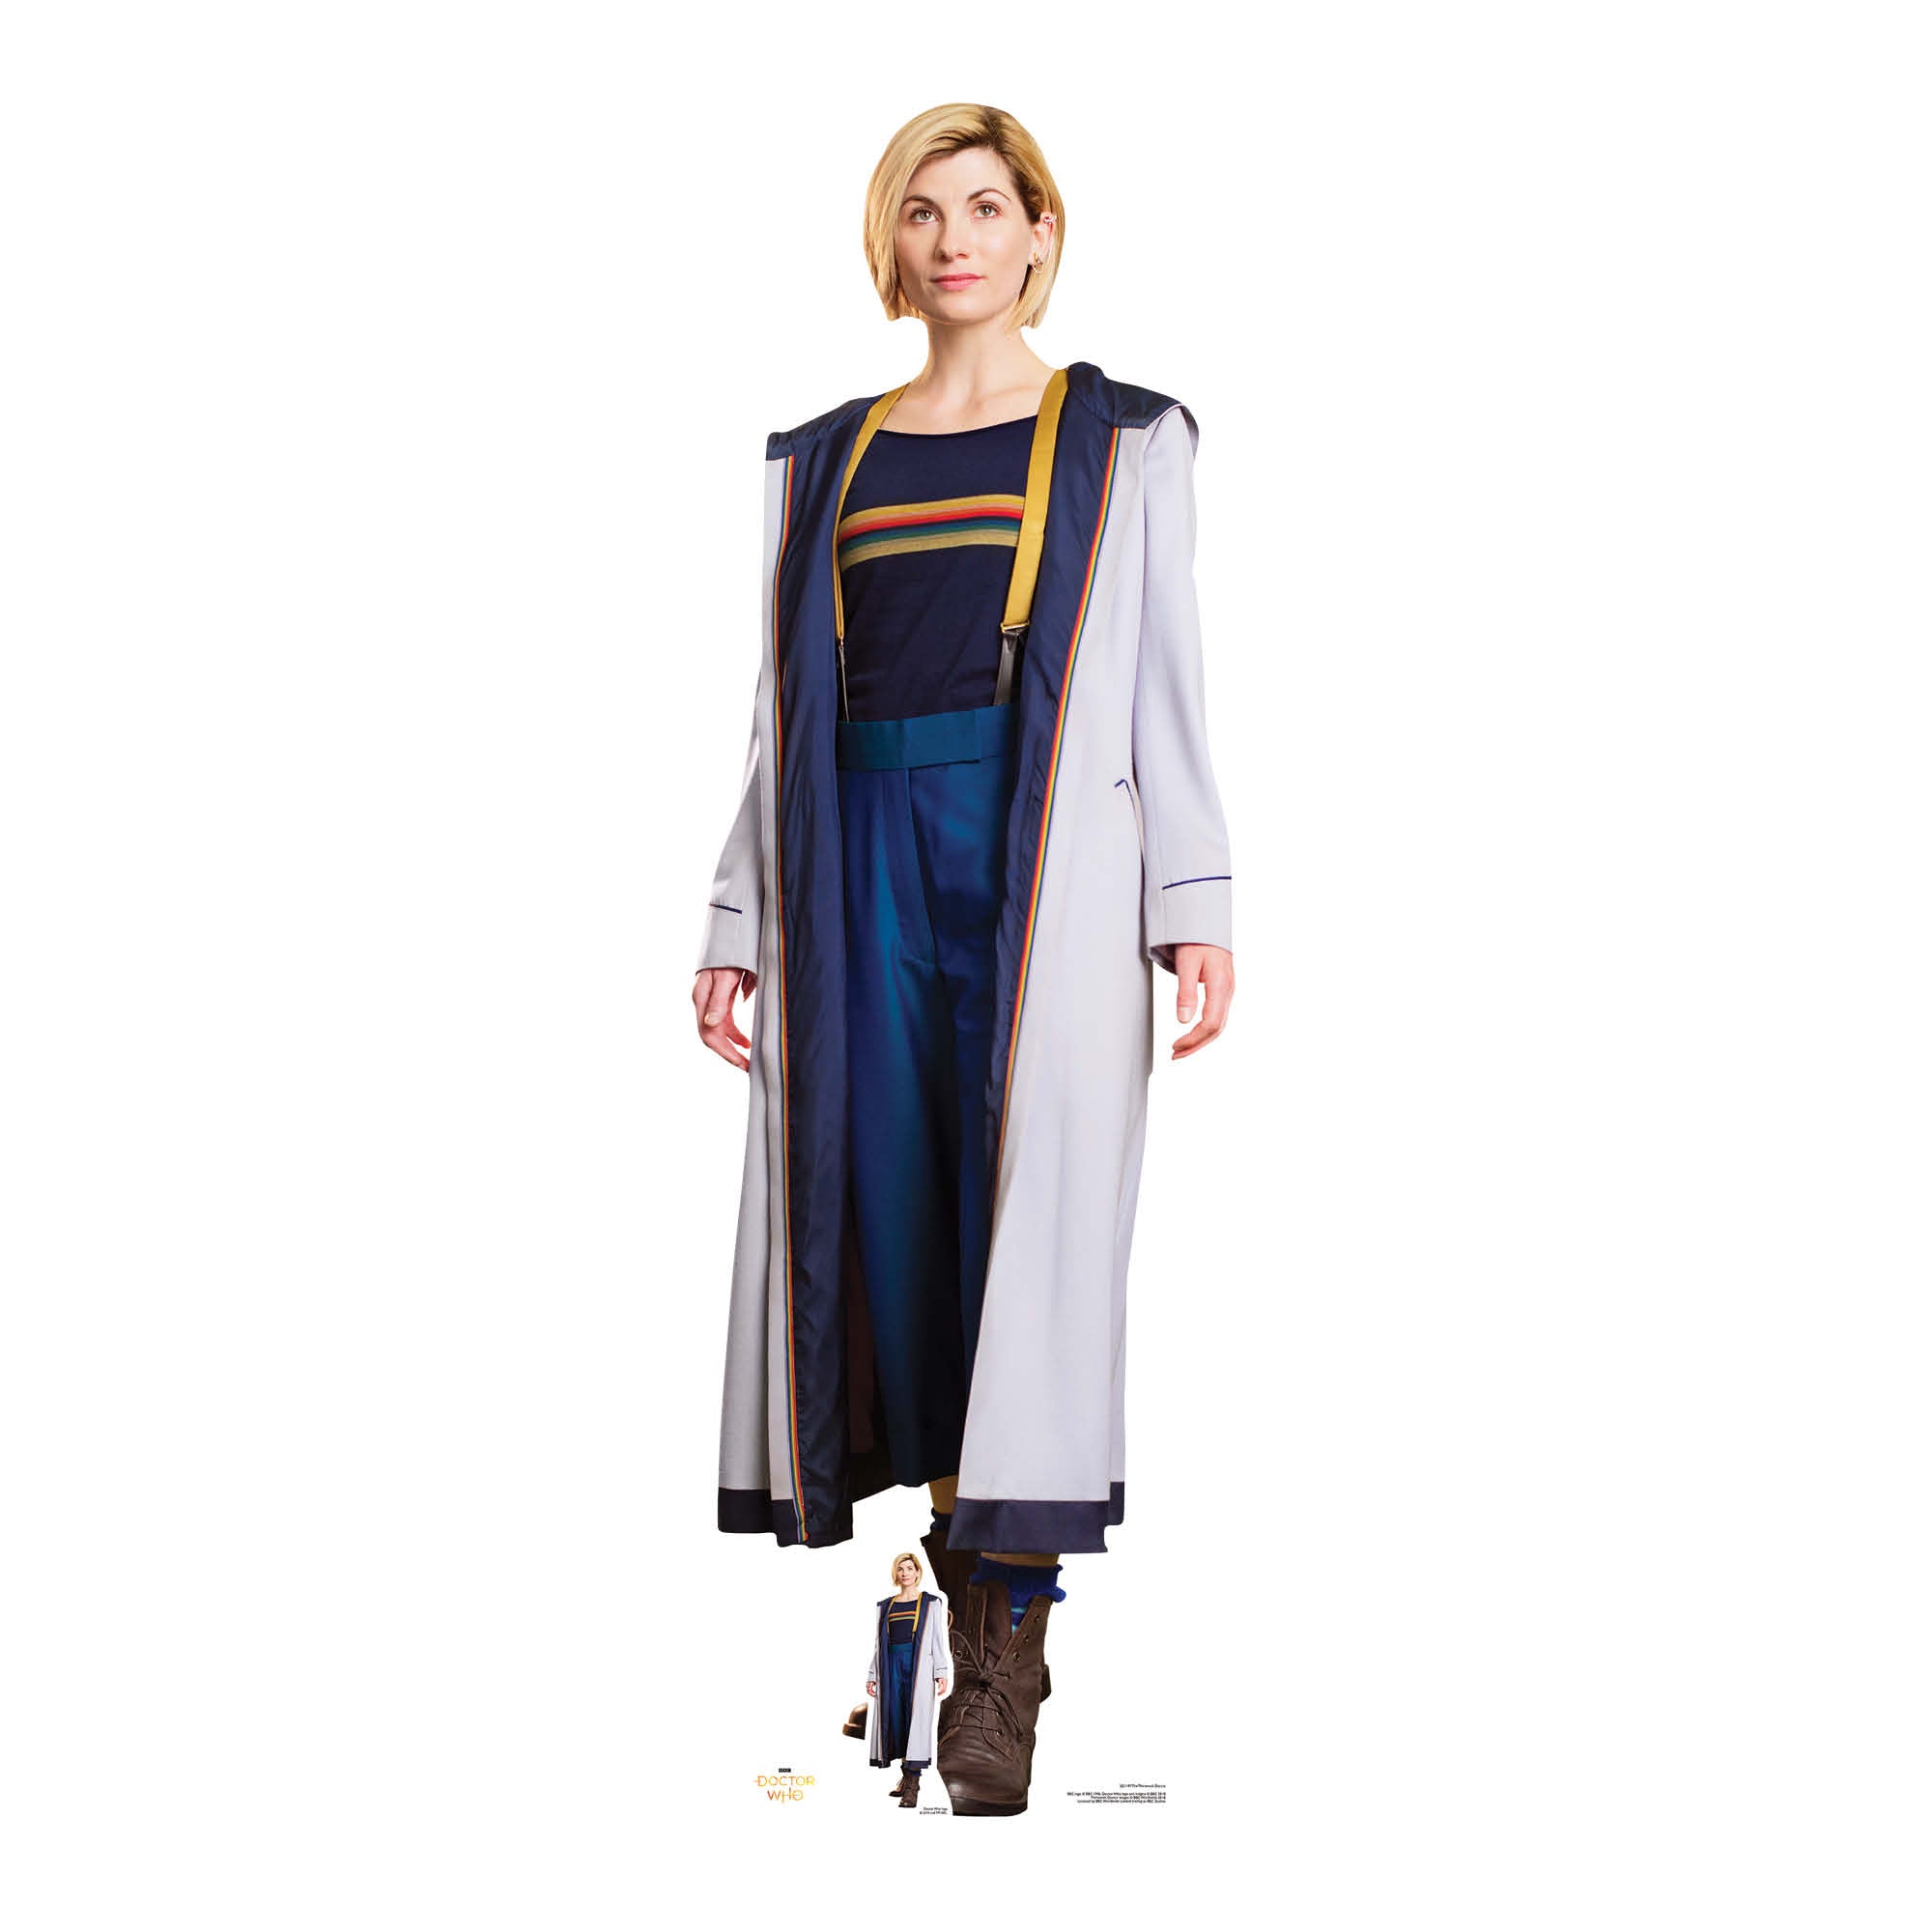 13 Cosplayers Who Are Ready For The 13th Doctor